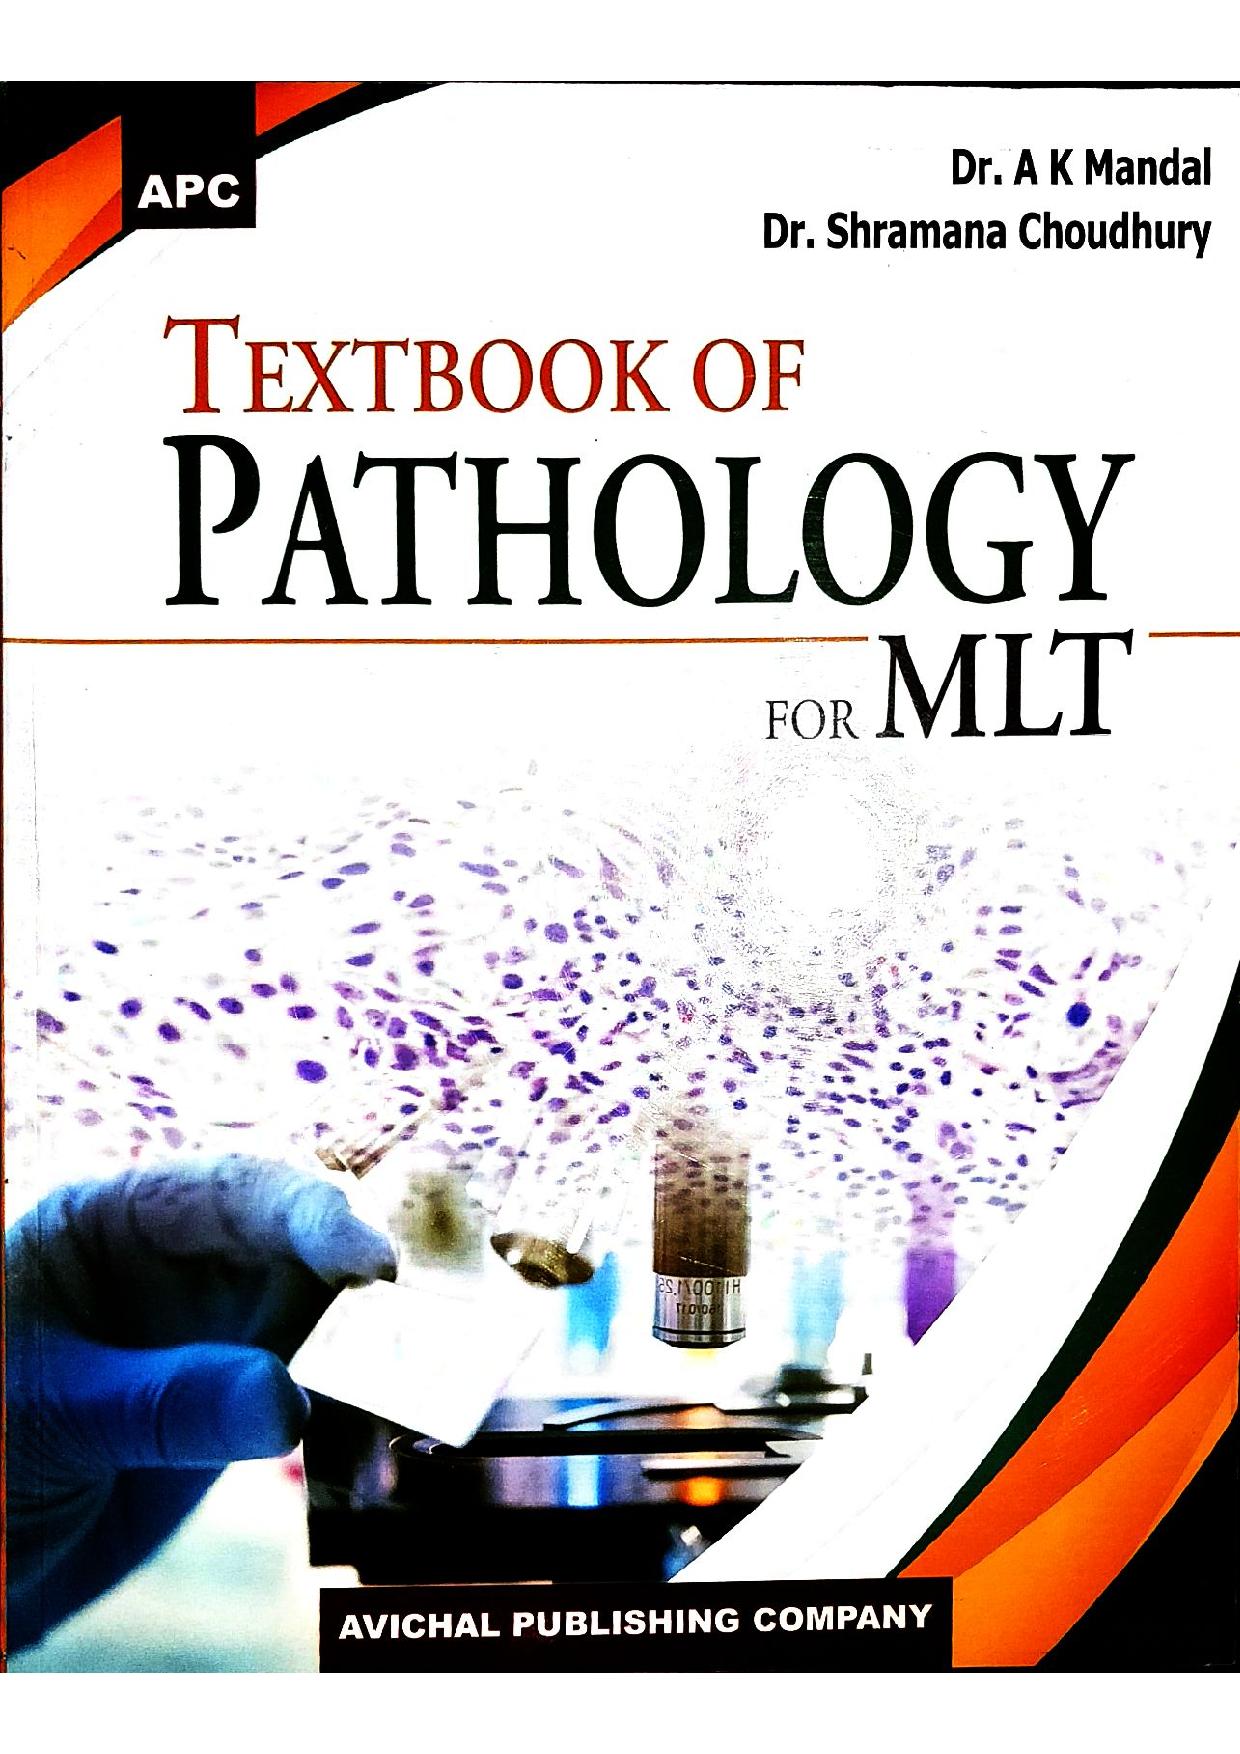 textbook-of-pathology-for-mlt